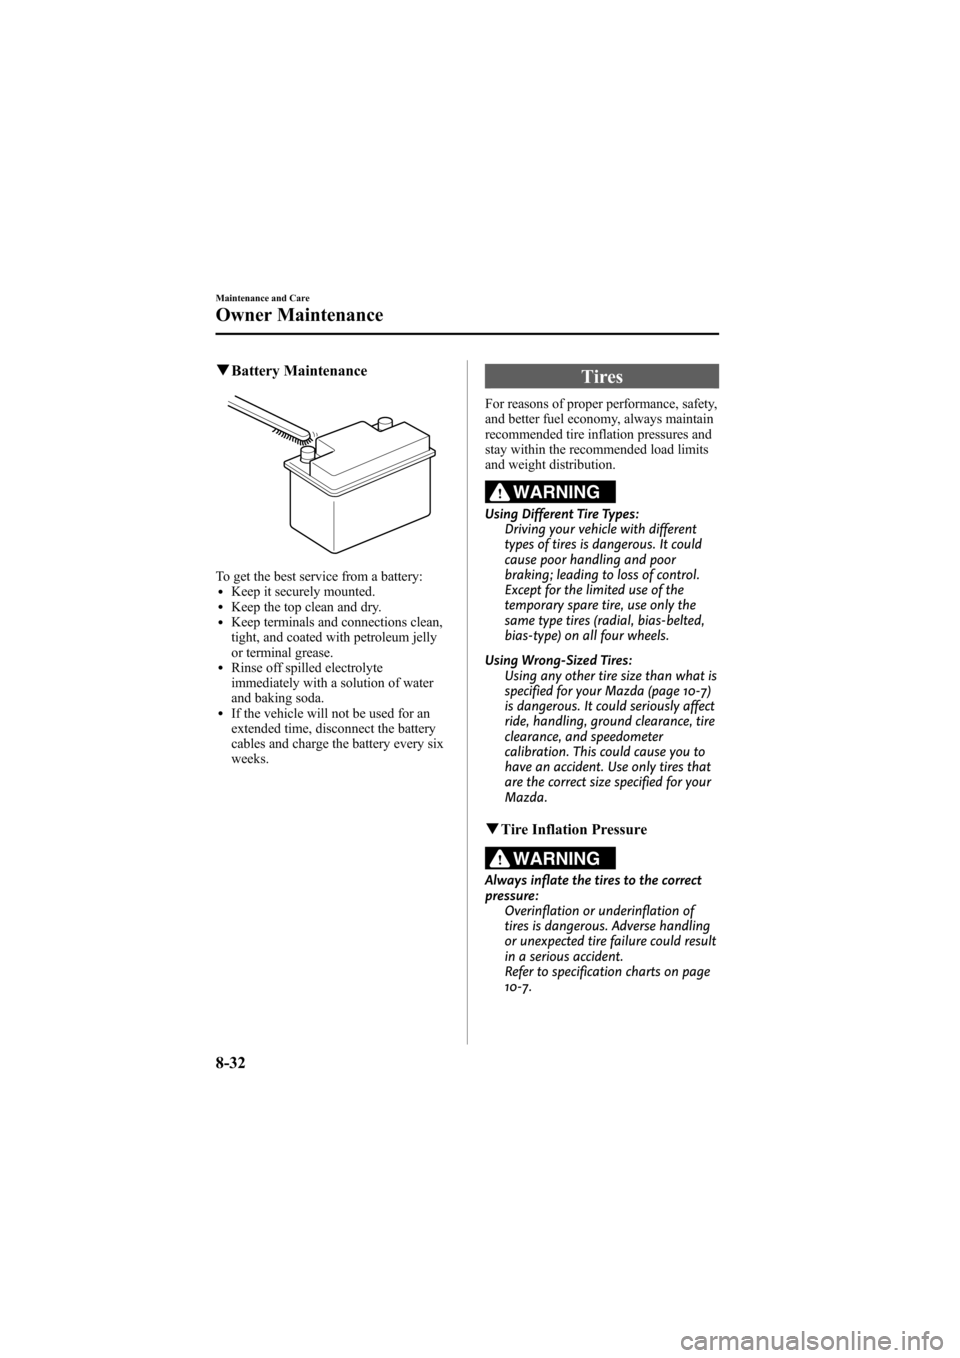 MAZDA MODEL 6 2009  Owners Manual (in English) Black plate (374,1)
qBattery Maintenance
To get the best service from a battery:lKeep it securely mounted.lKeep the top clean and dry.lKeep terminals and connections clean,
tight, and coated with petr